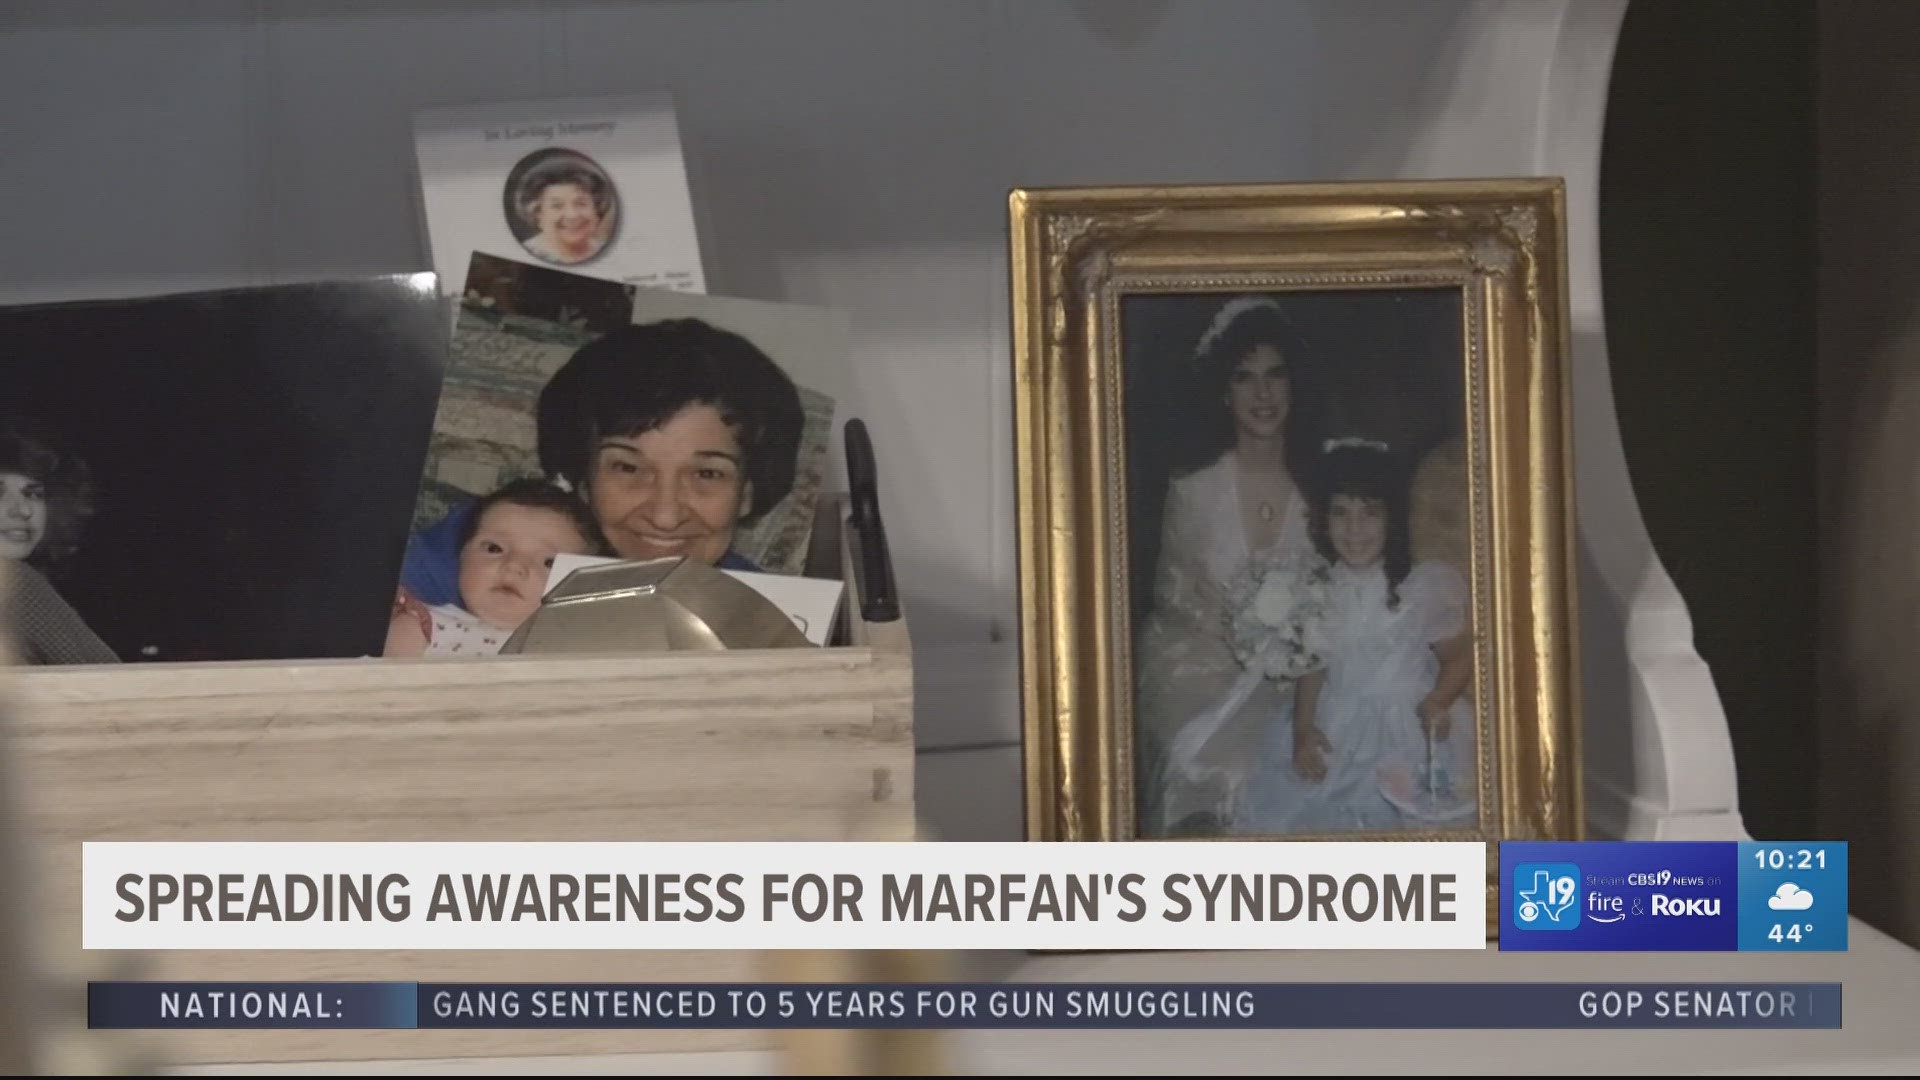 Jaelyn Kirby is a Whitehouse High School student, baseball enthusiast and a patient at the Texas Children’s in Houston where she’s treated for Marfan syndrome.